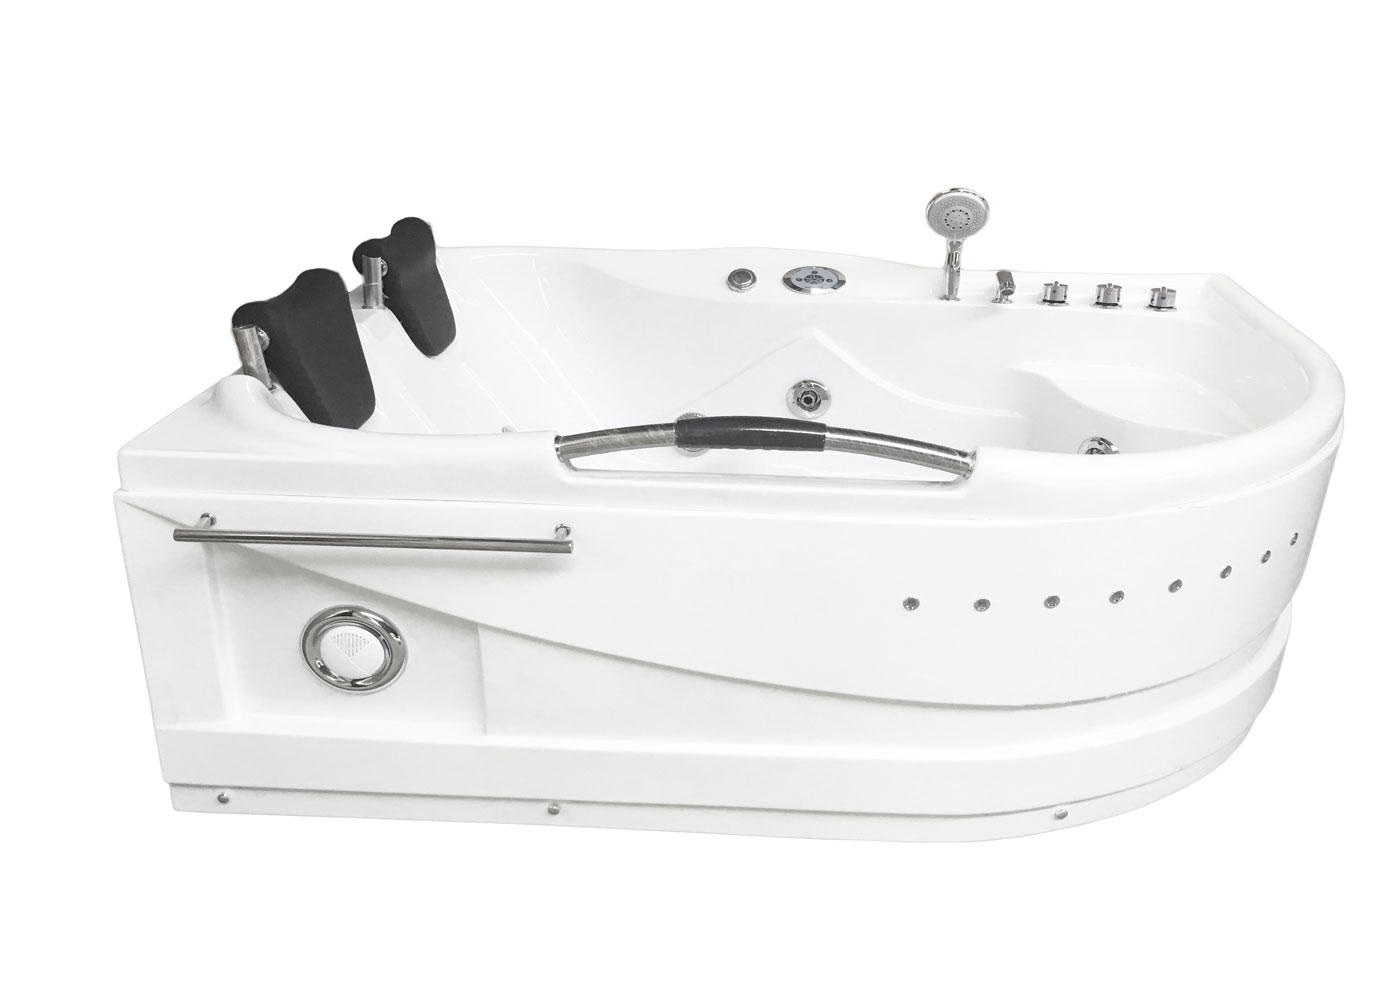 Whirlpool Bathtub 67 X 47 Hot Tub Double Pump With Heater And Bluetooth Cayman